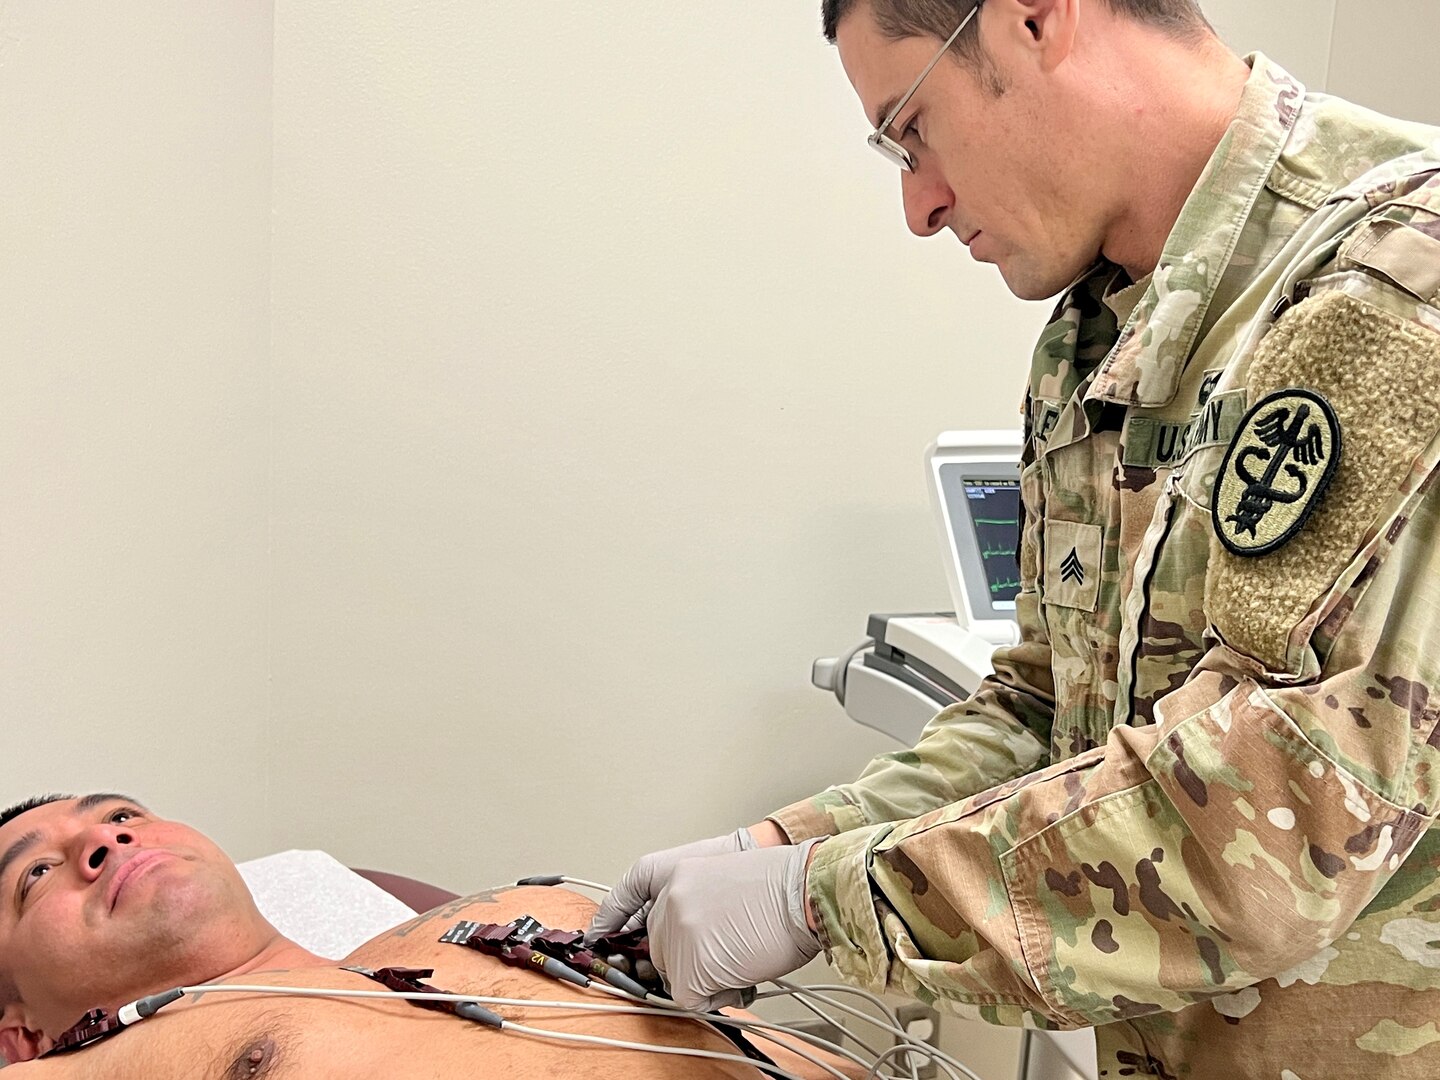 Soldier conducting an EKG on a patient.